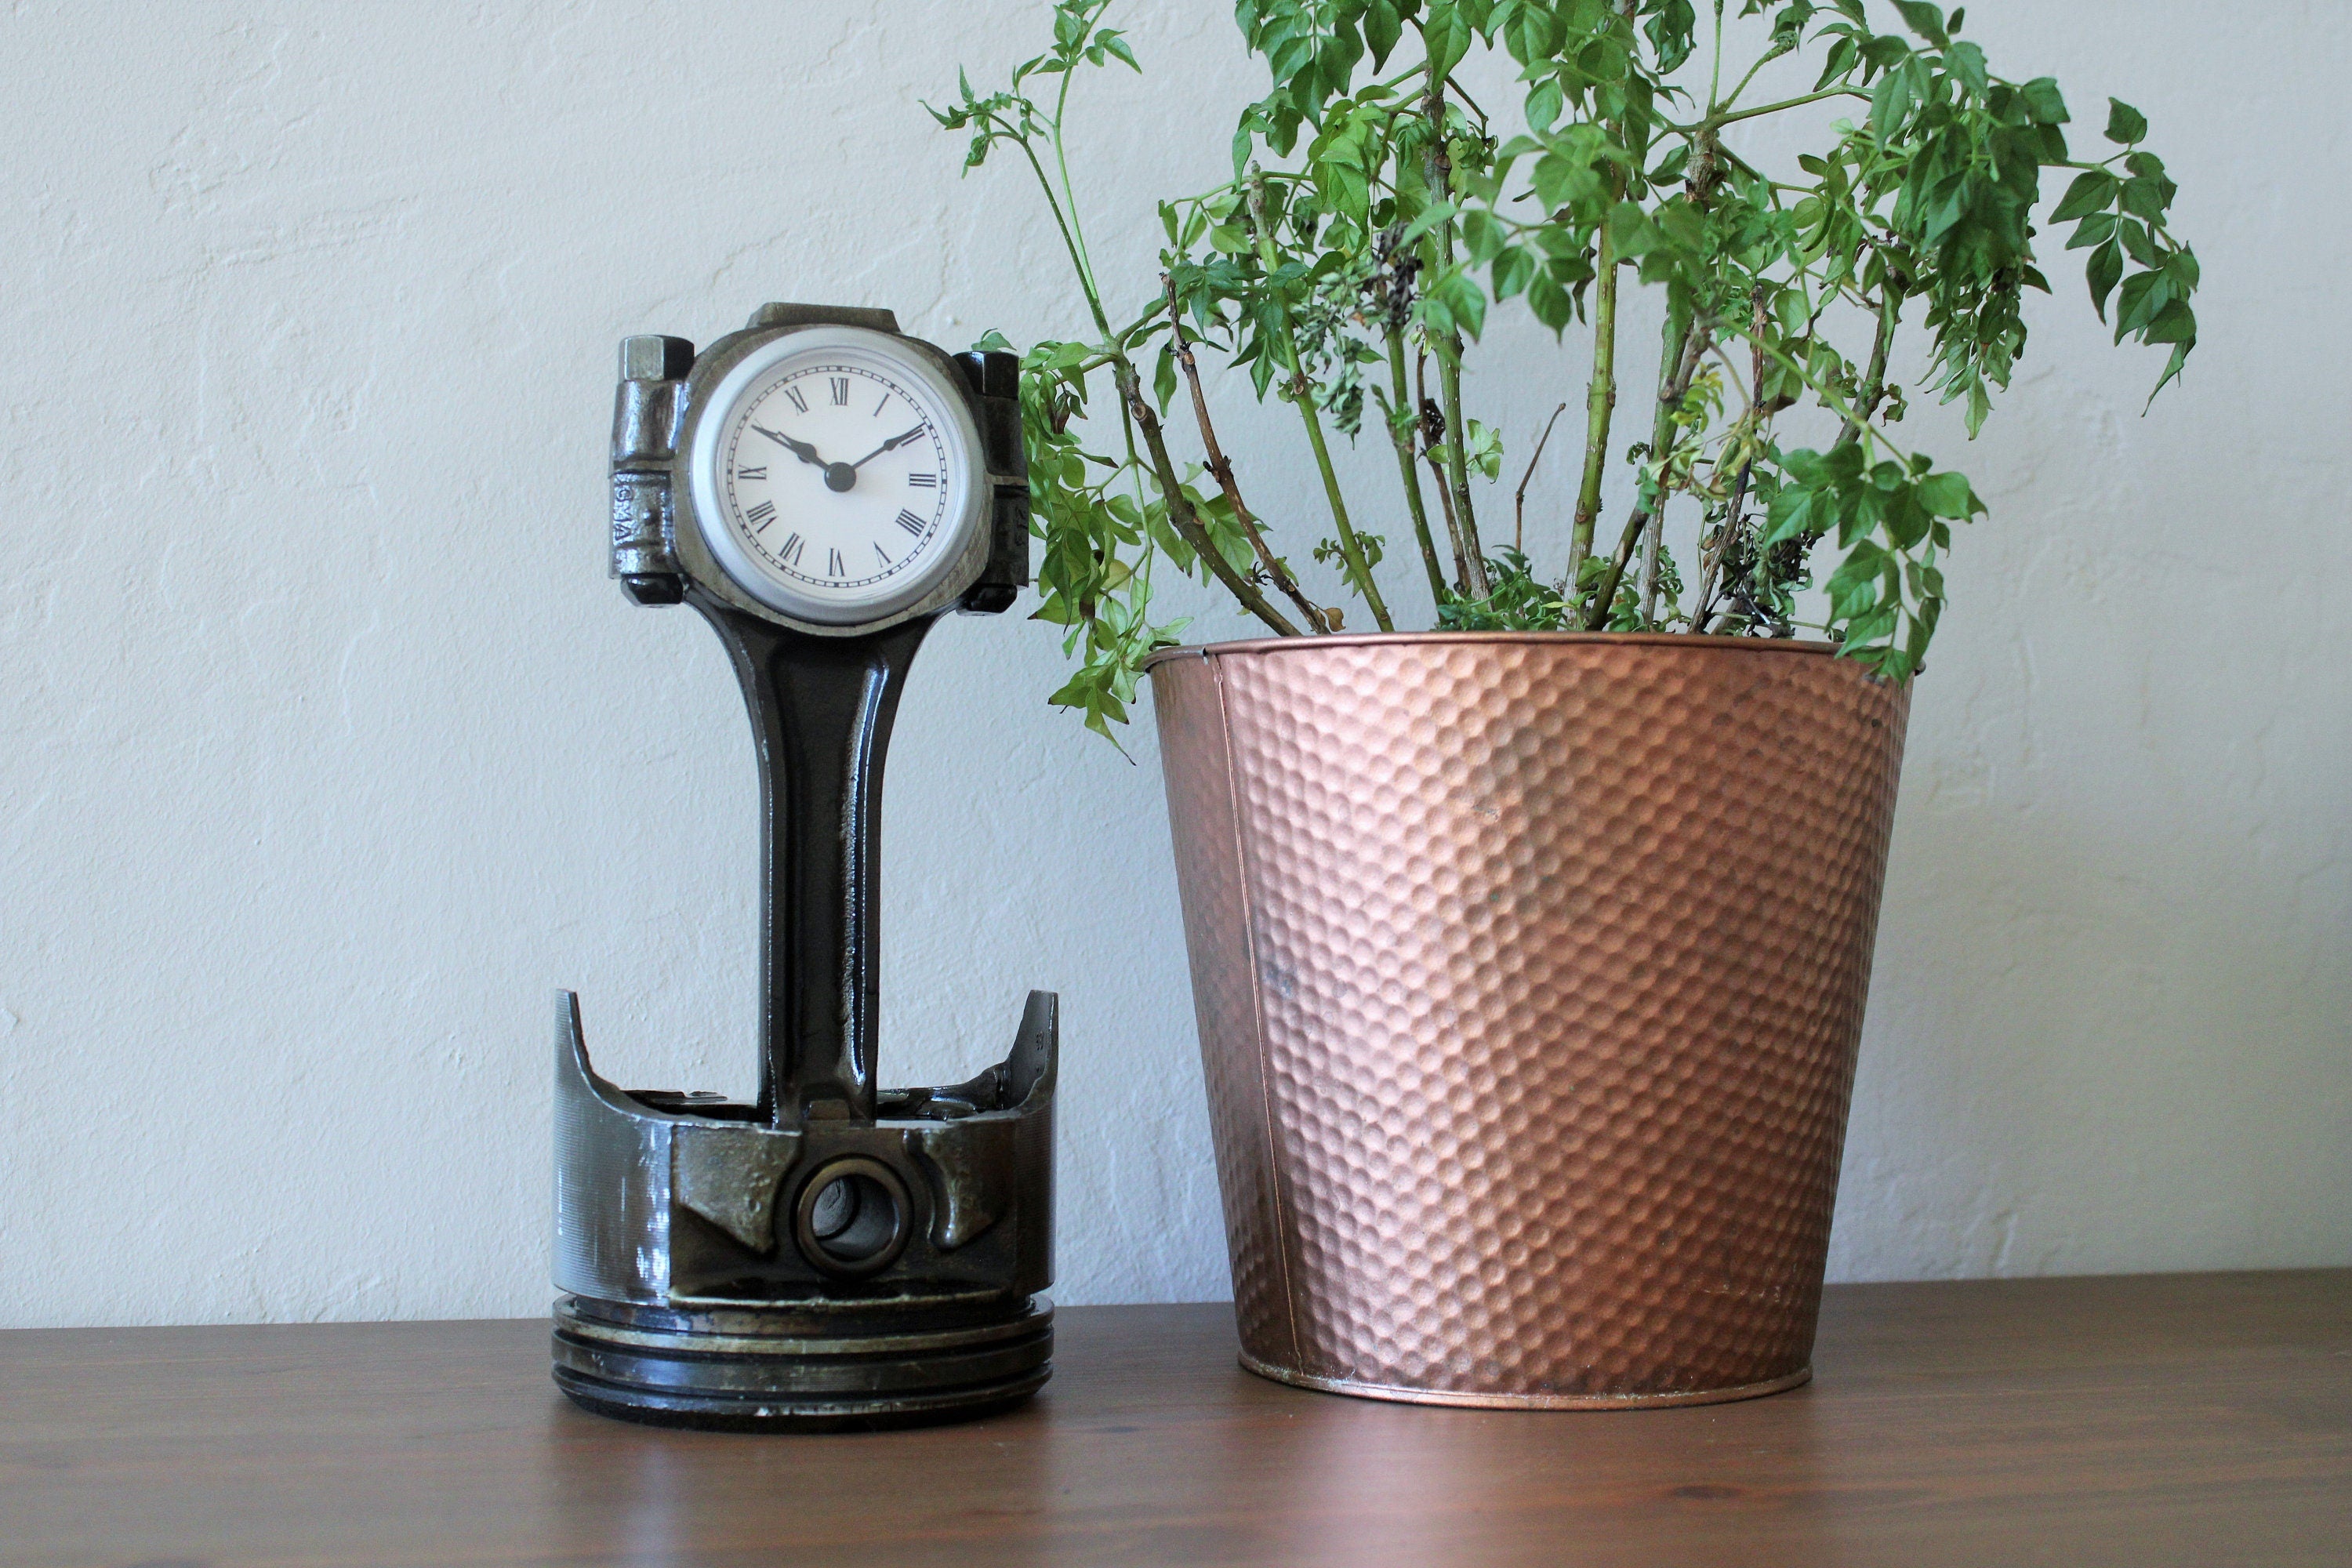 Clock made from a Chevrolet car's piston on a table next to a potted plant.